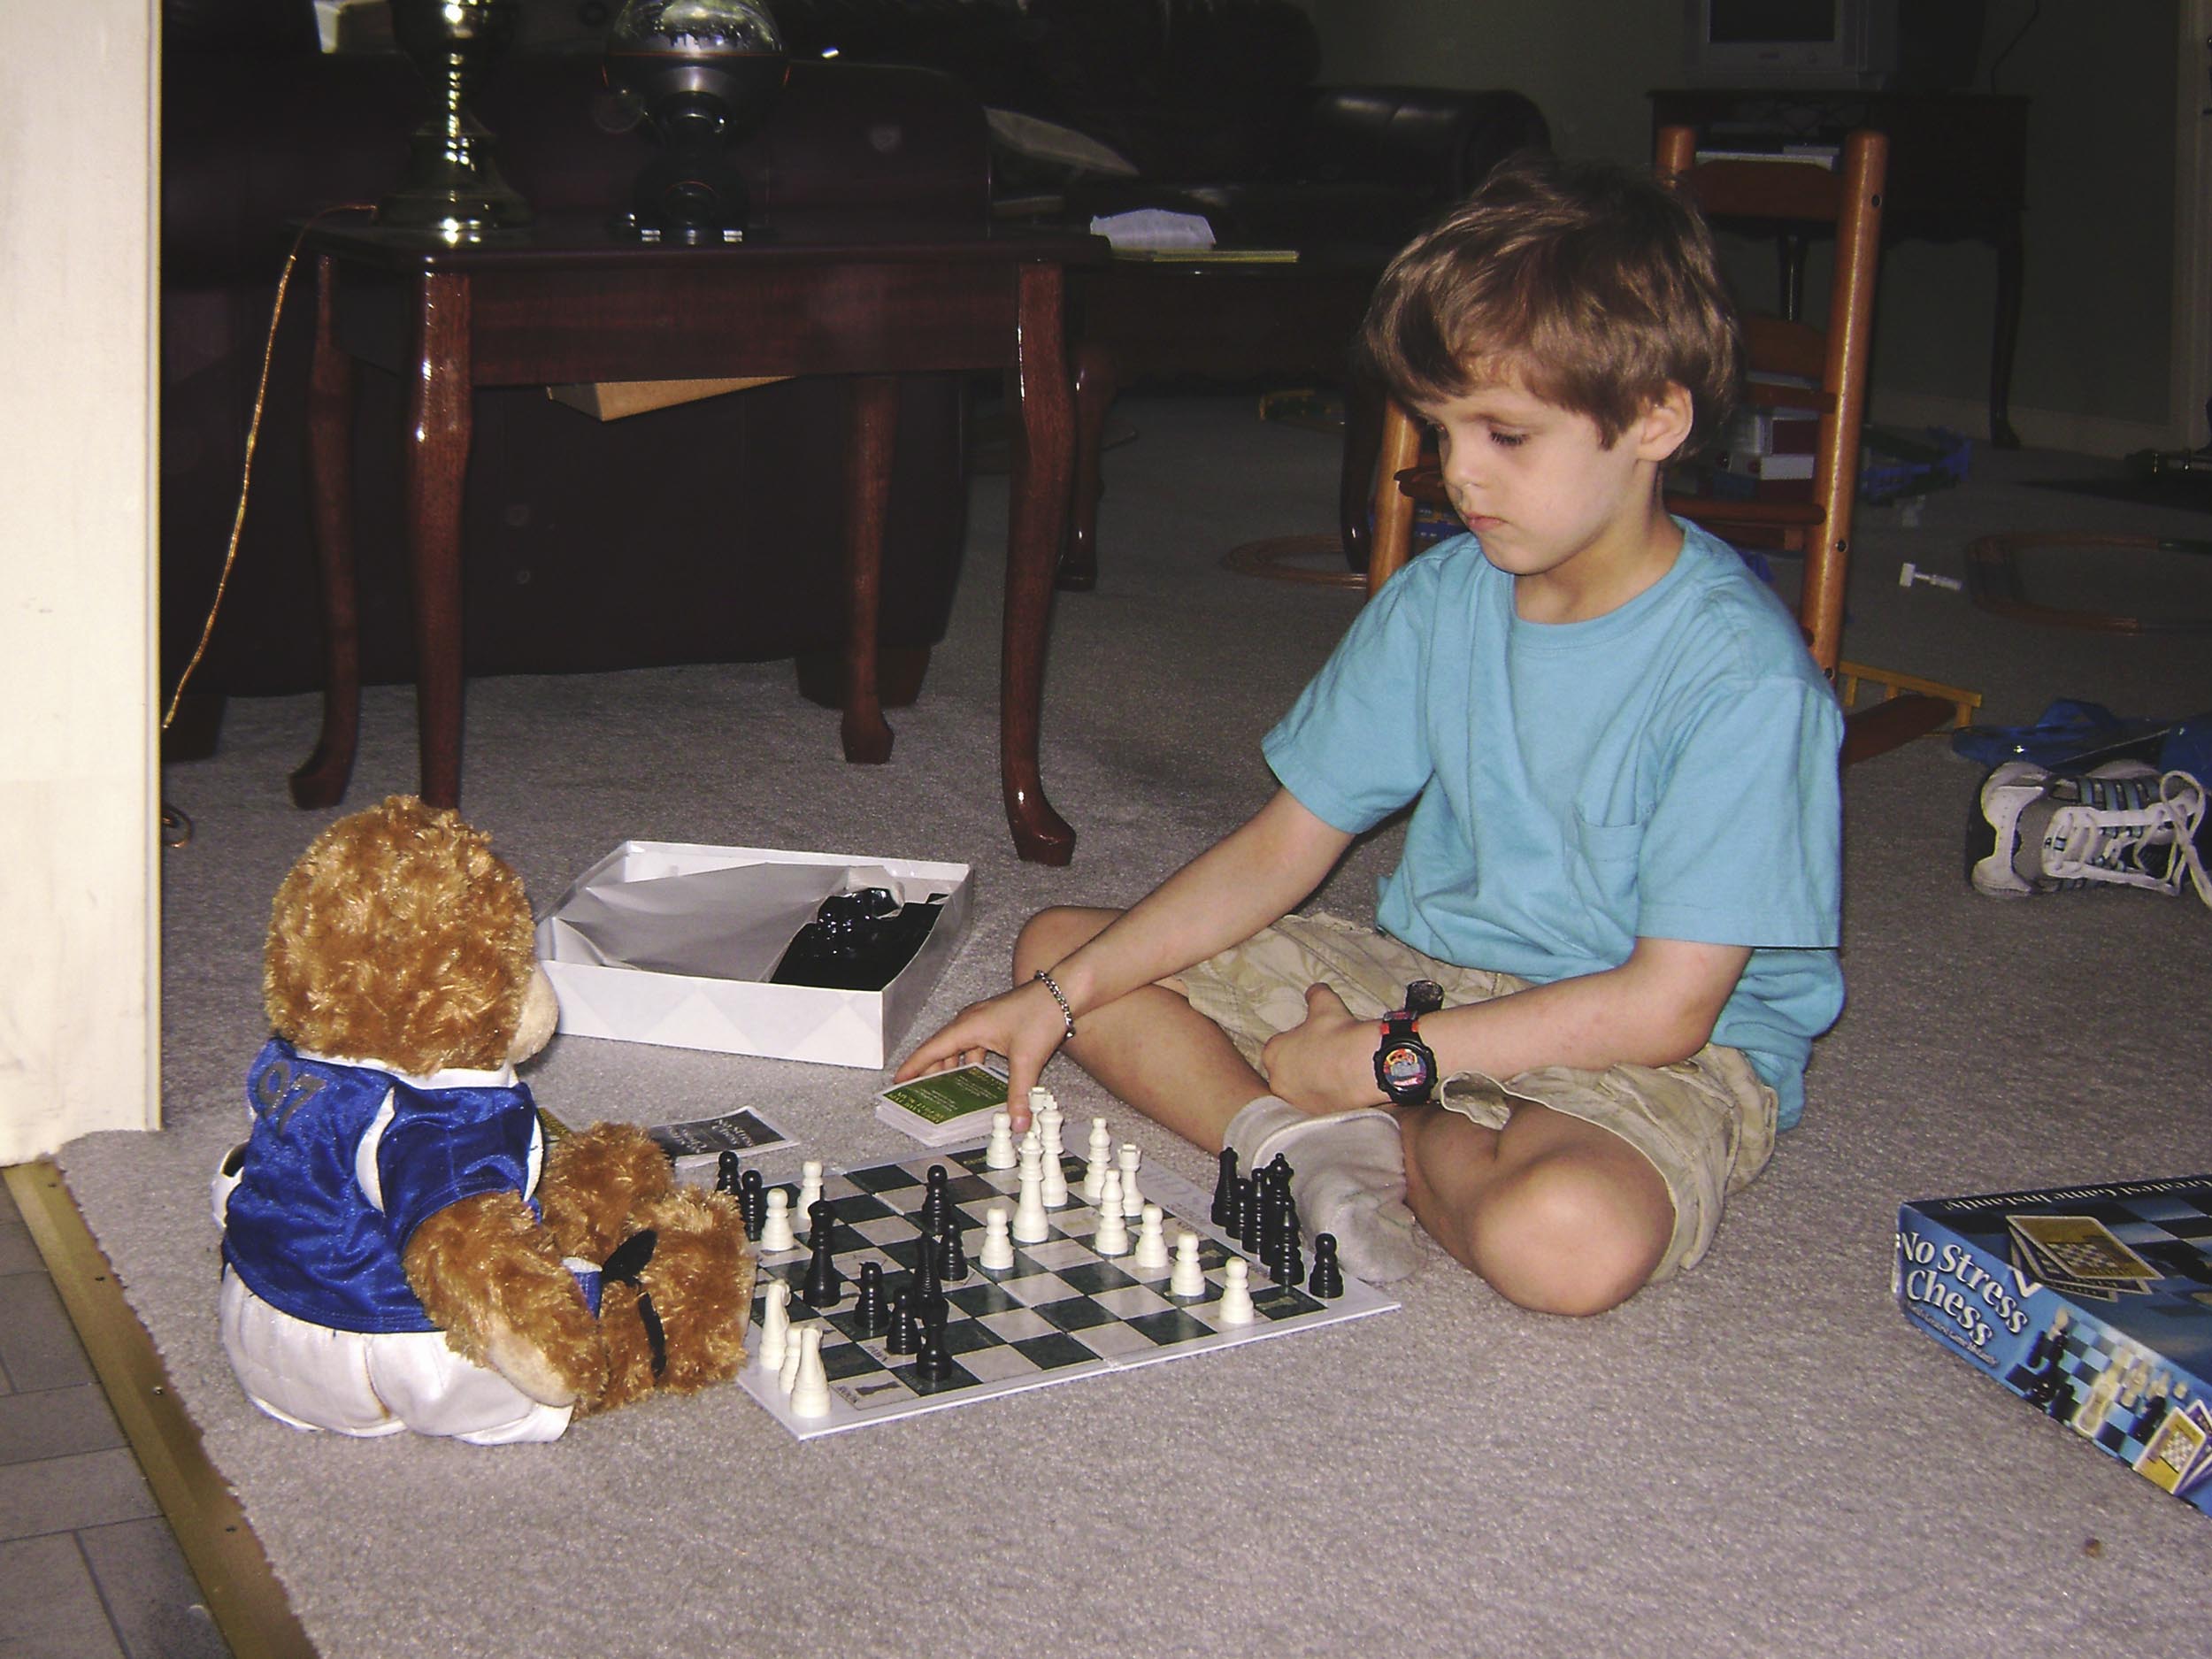 Jason Morefield when he was a child sitting on the floor playing chess with a teddy bear